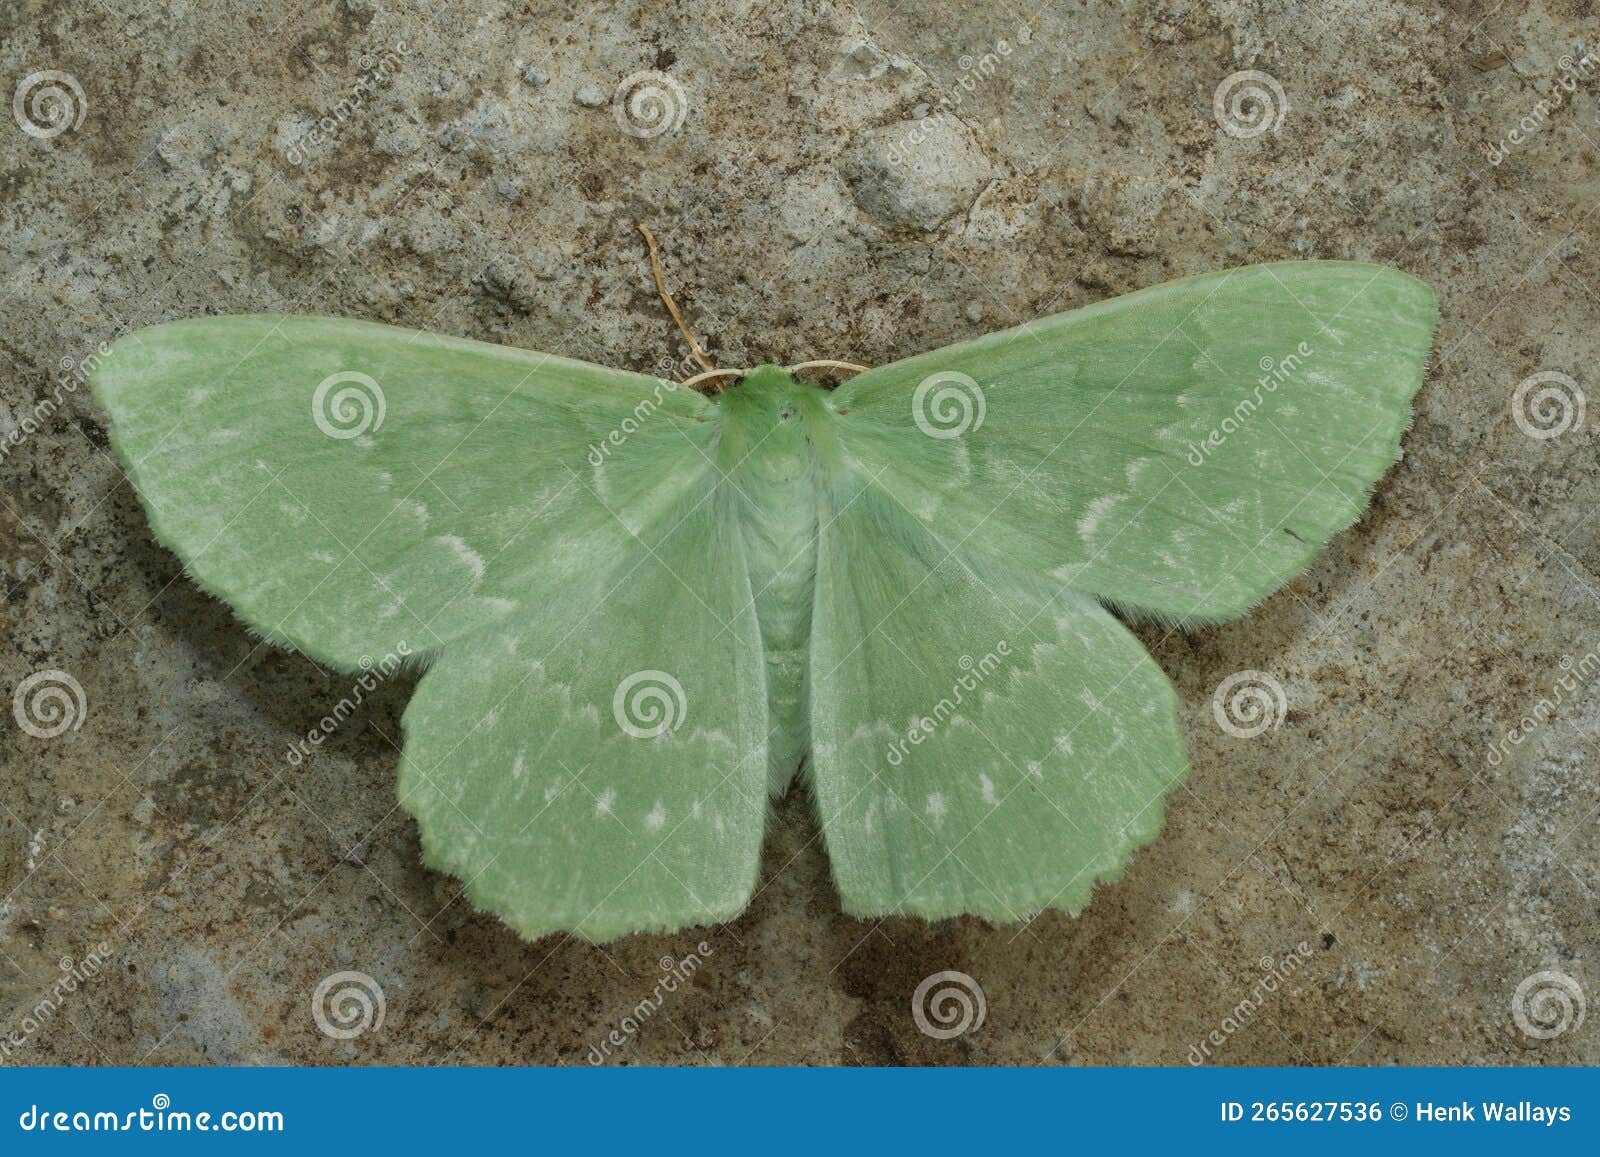 closeup on the colorful soft green large emerald geometer moth, geometra papilionaria with spread wings